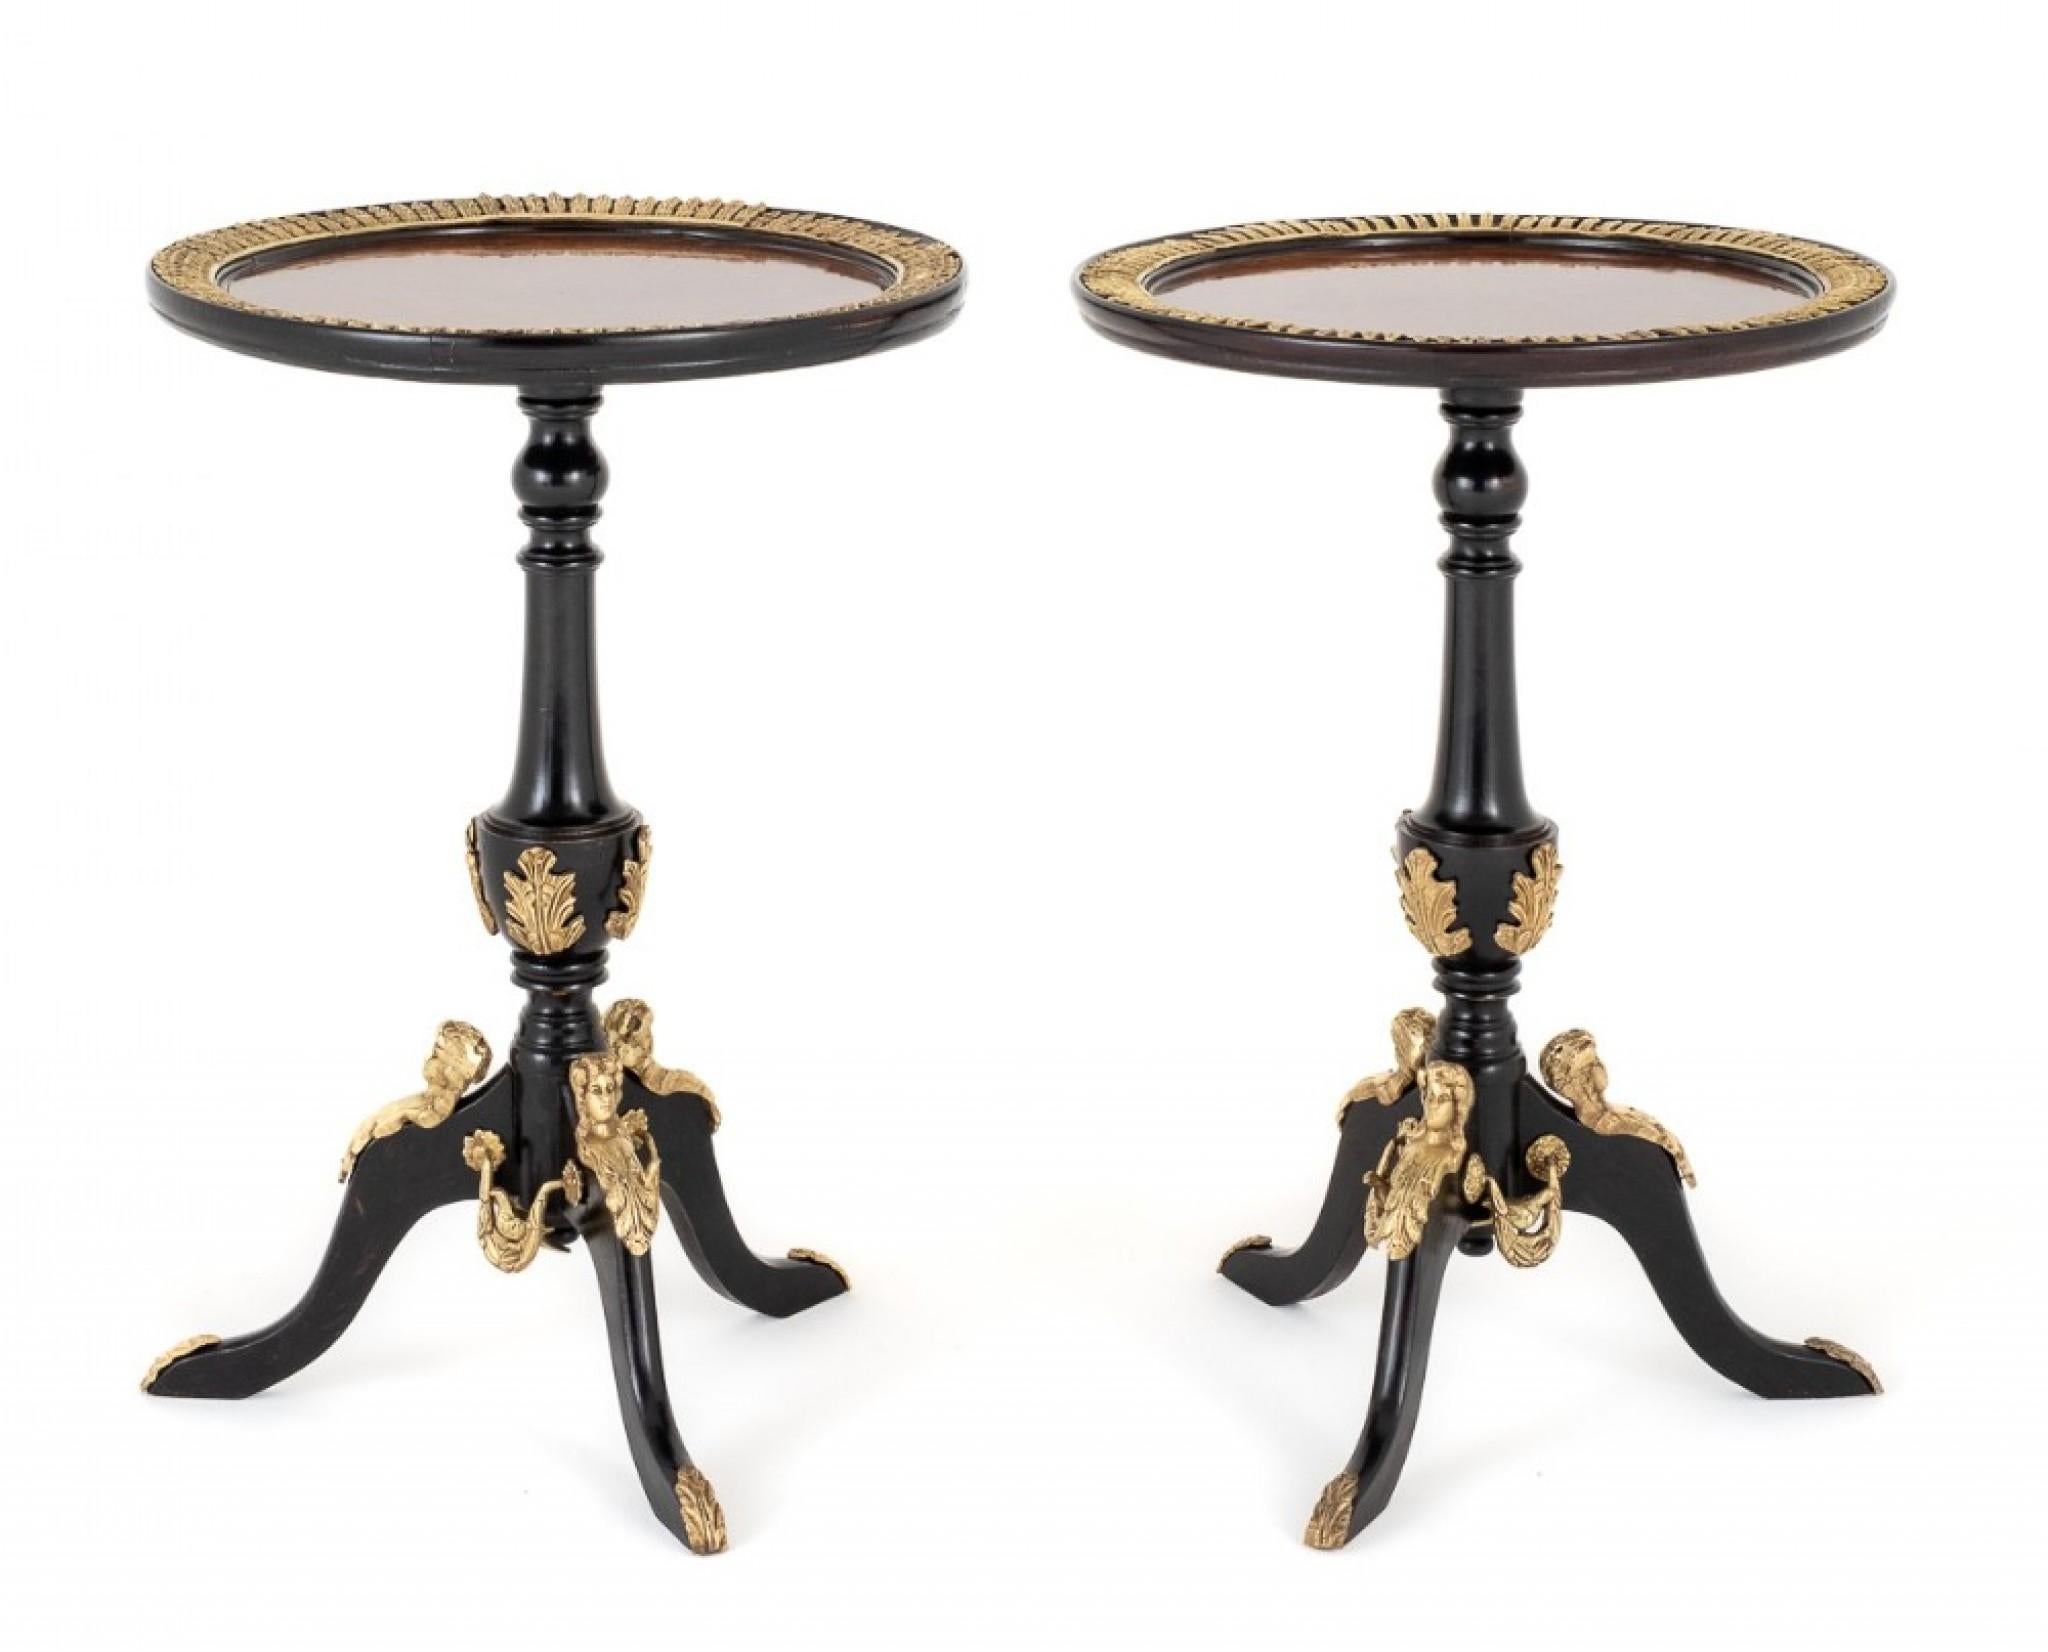 Each table having a turned column and swept legs.
The Tops of The Tables having Figured Oak Veneers.
The Whole of The Tables Being Embelished With Decorative Cast Brass Mounts
circa 1920
Presented in good condition.
Size:
Height 30”